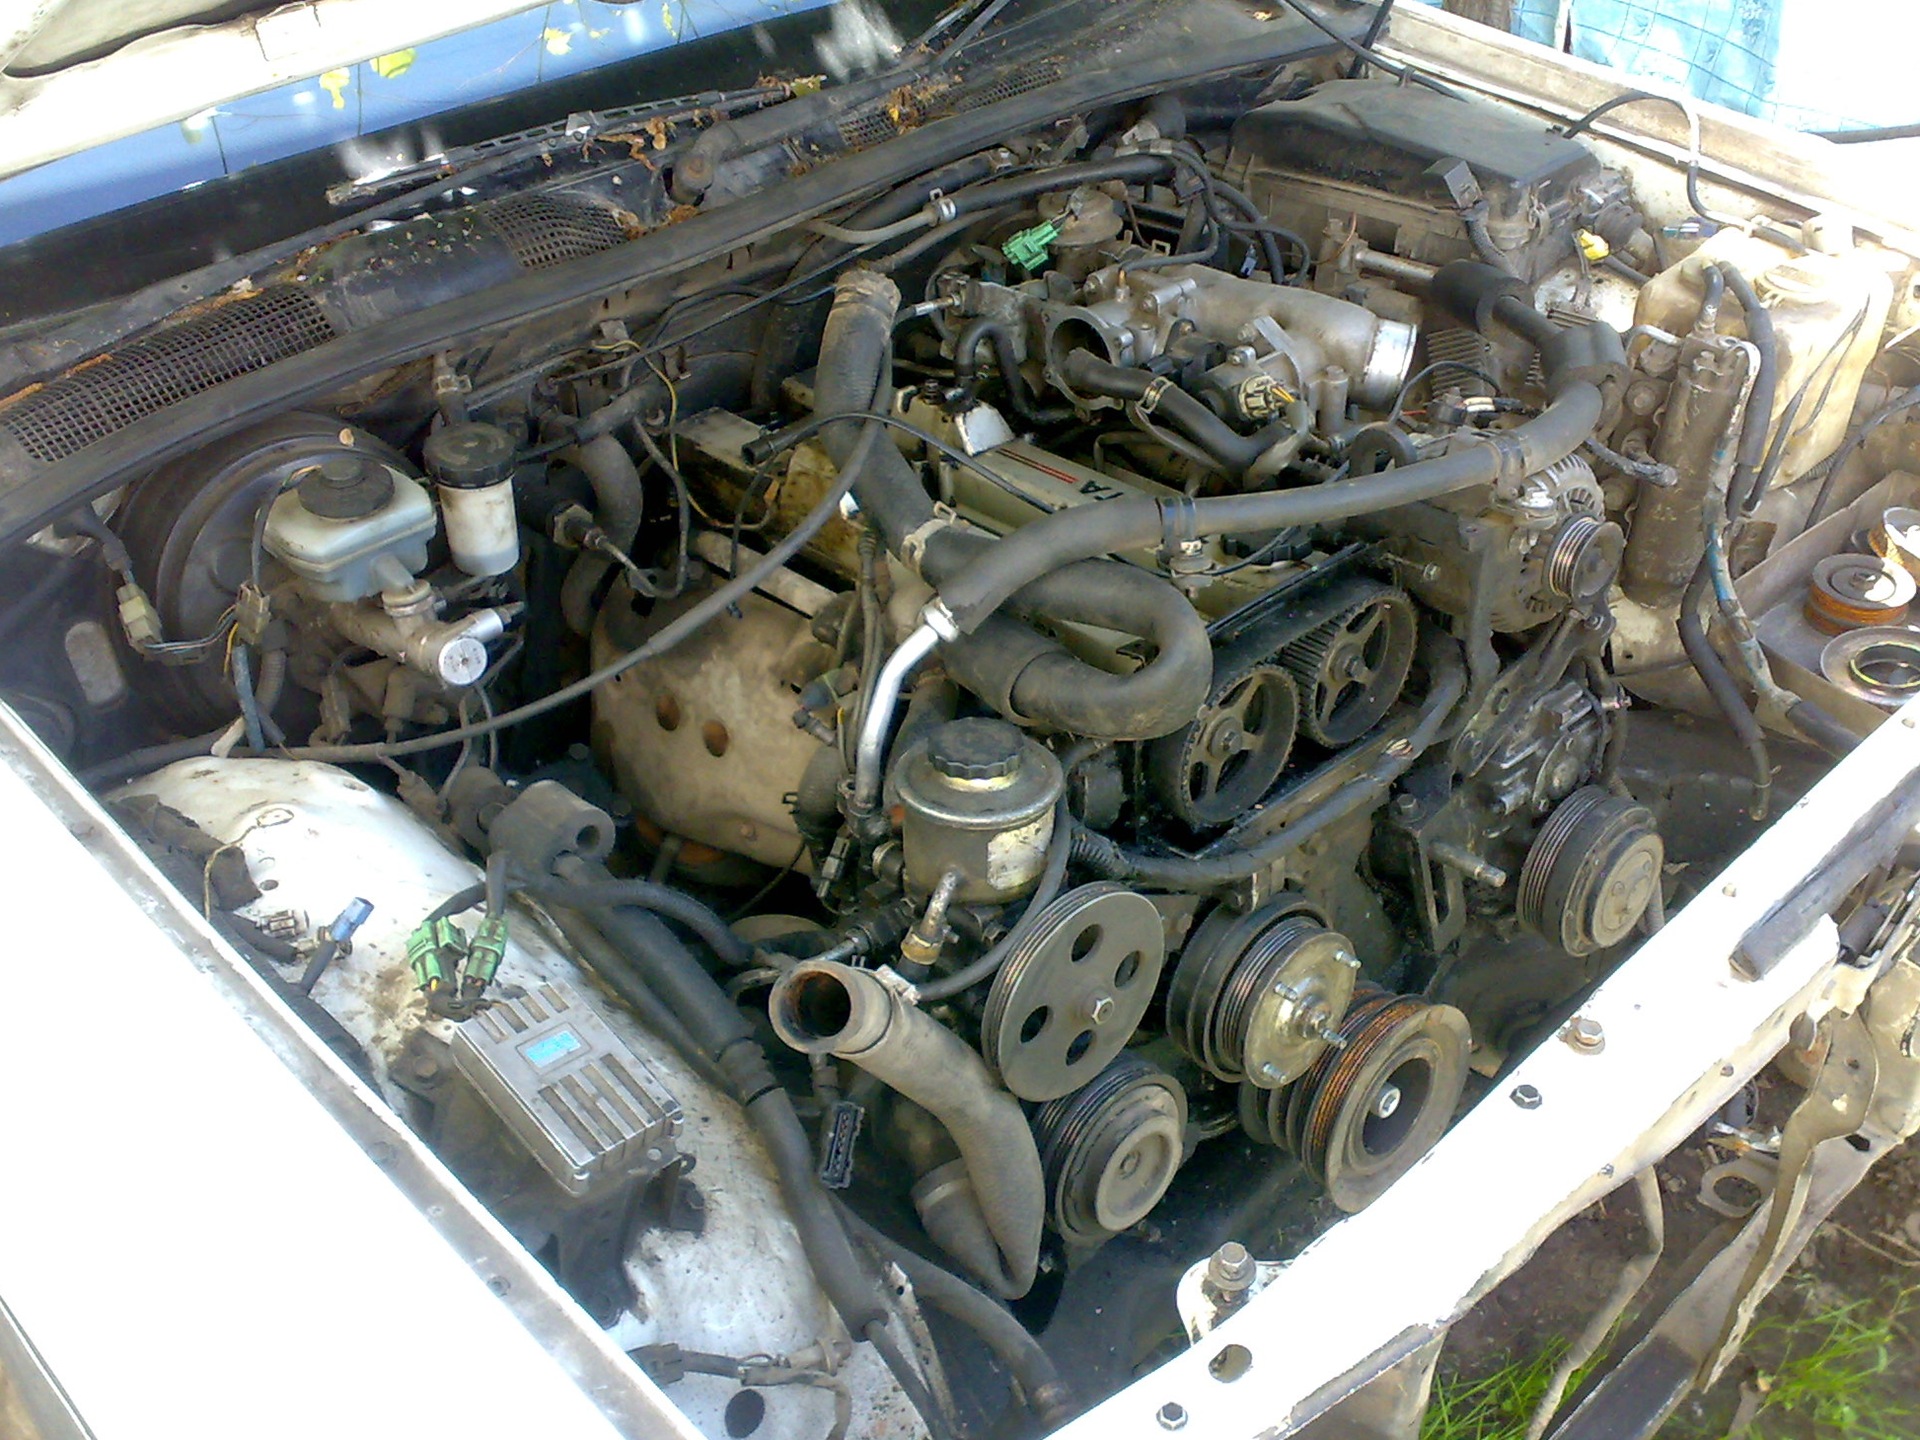 Few photos about the work started - Toyota Crown 20 liter 1988